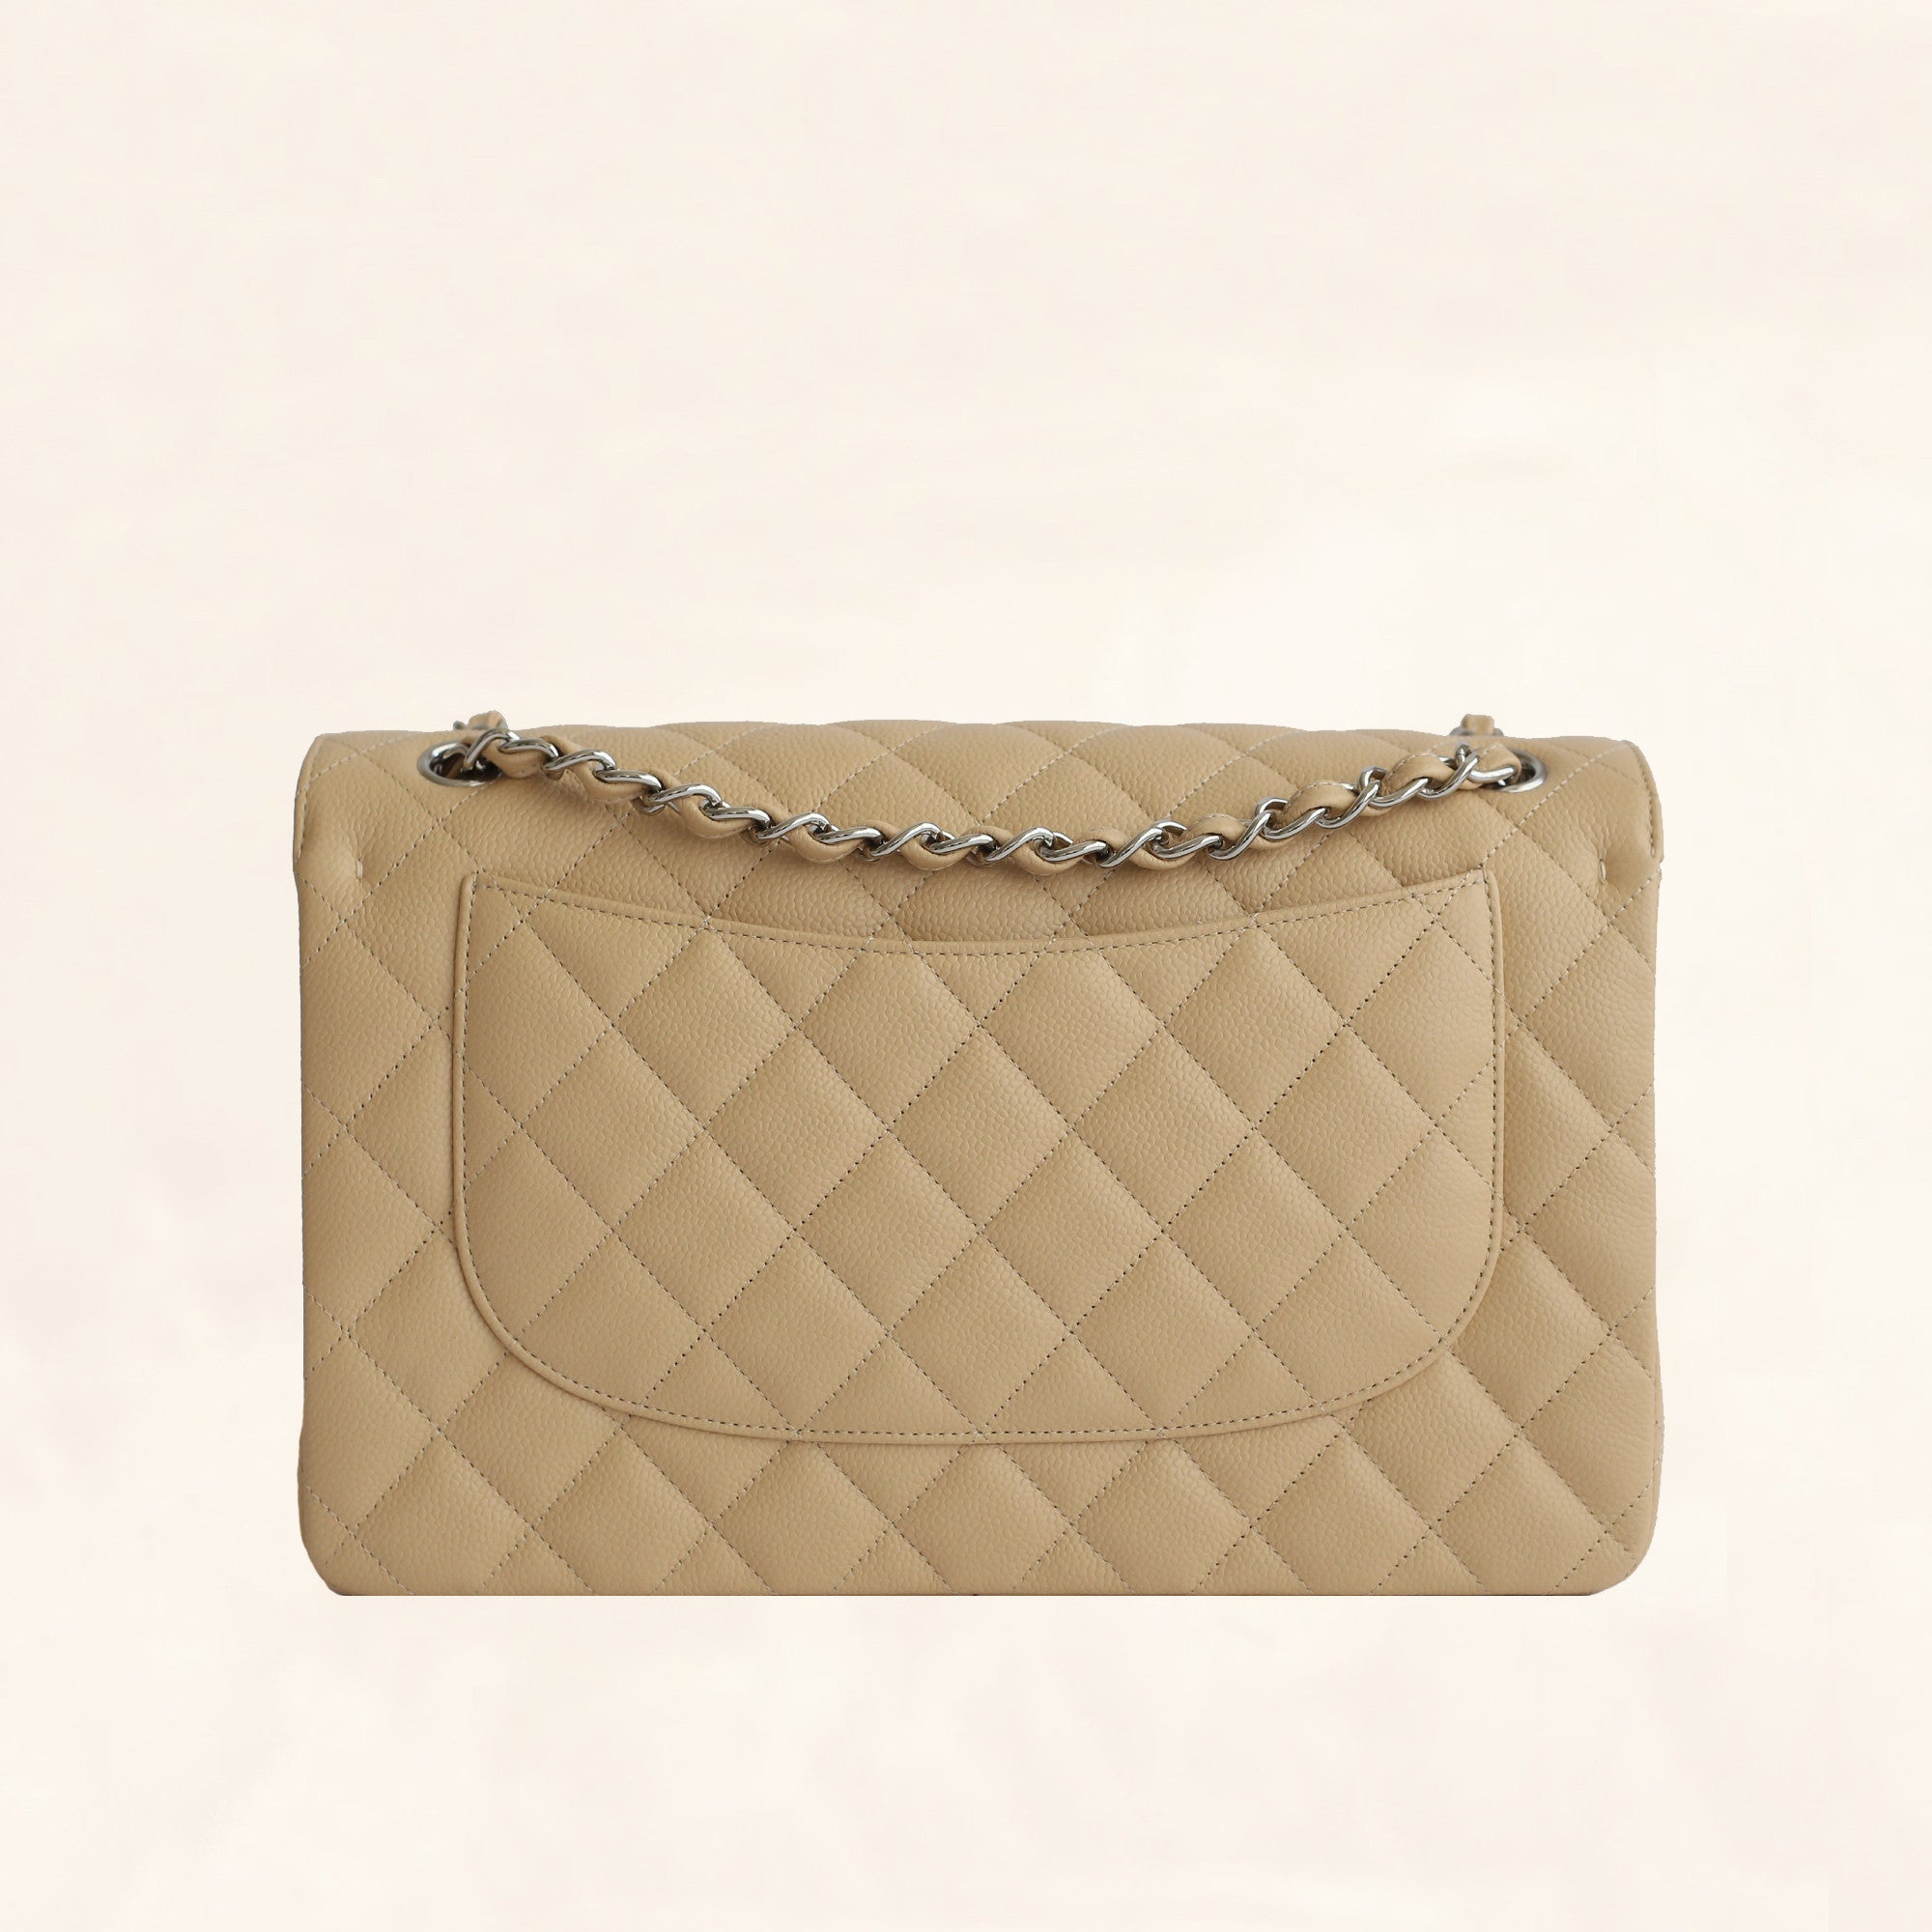 Chanel Large Classic Quilted Caviar Handbag